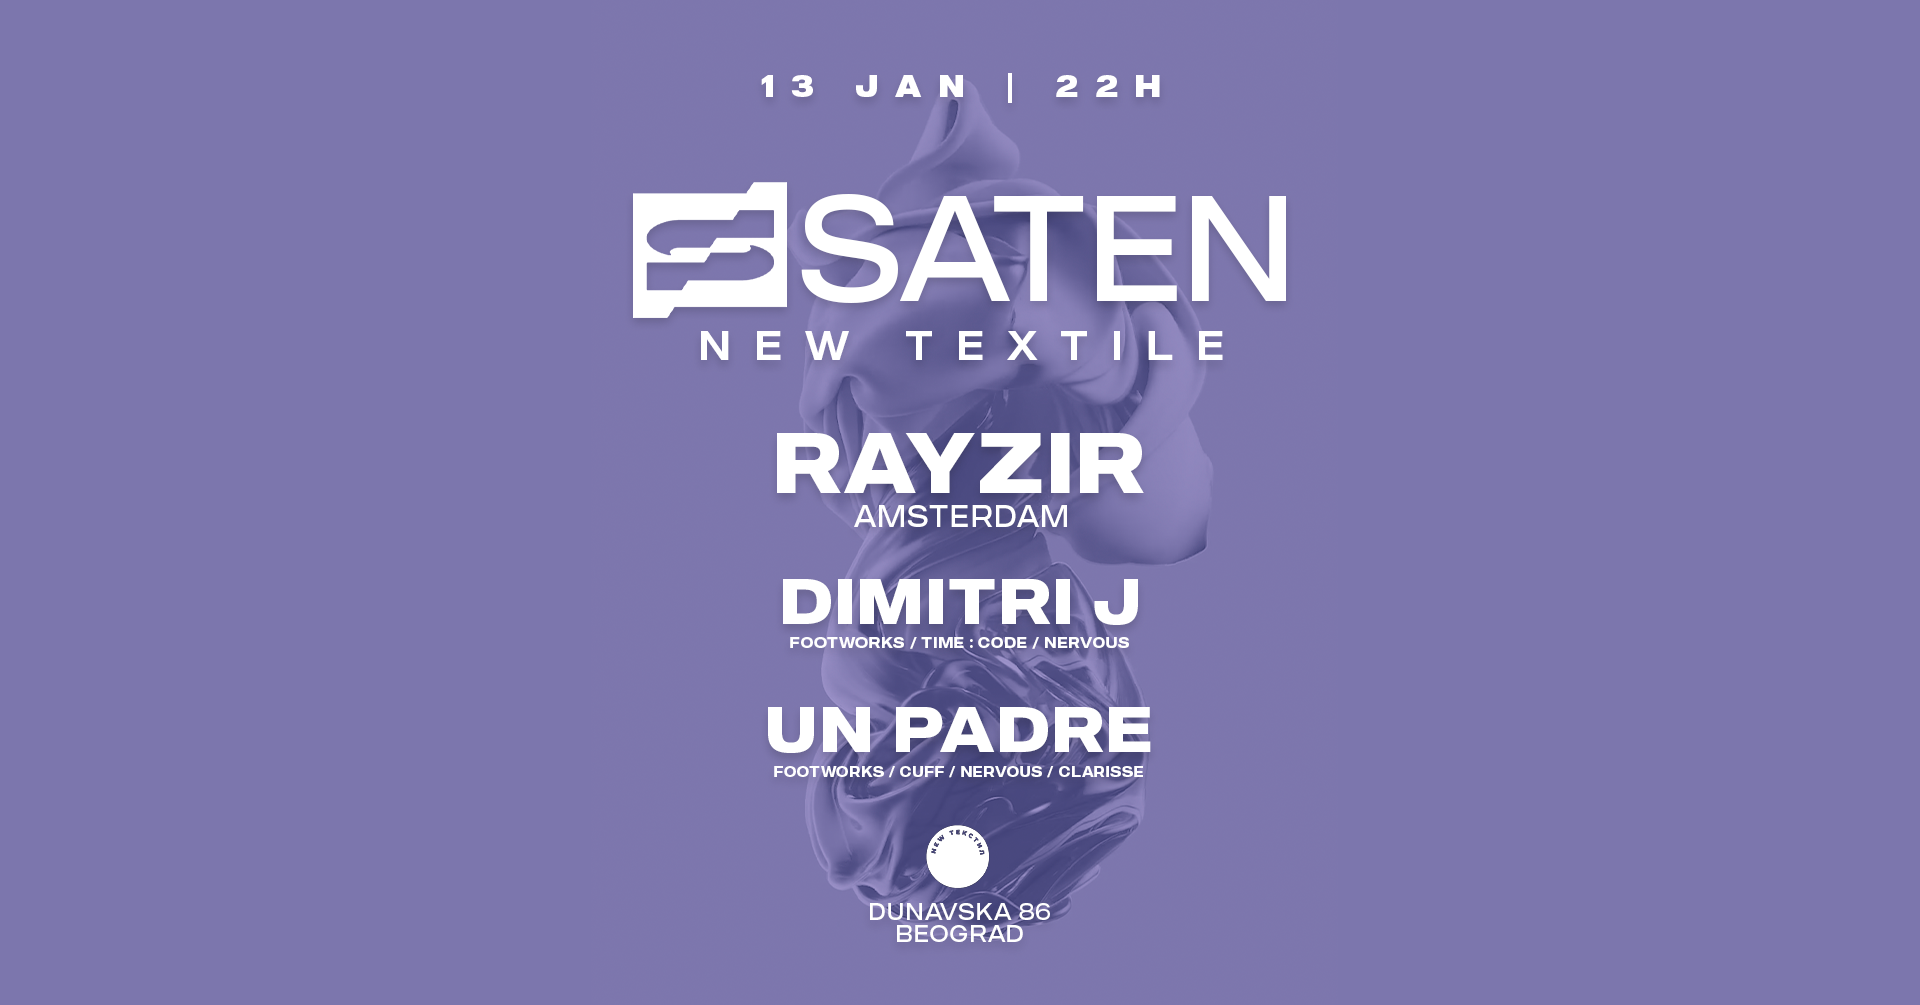 Saten Show at New Tekstile with Rayzir, Dimitri J, Un Padre - フライヤー表